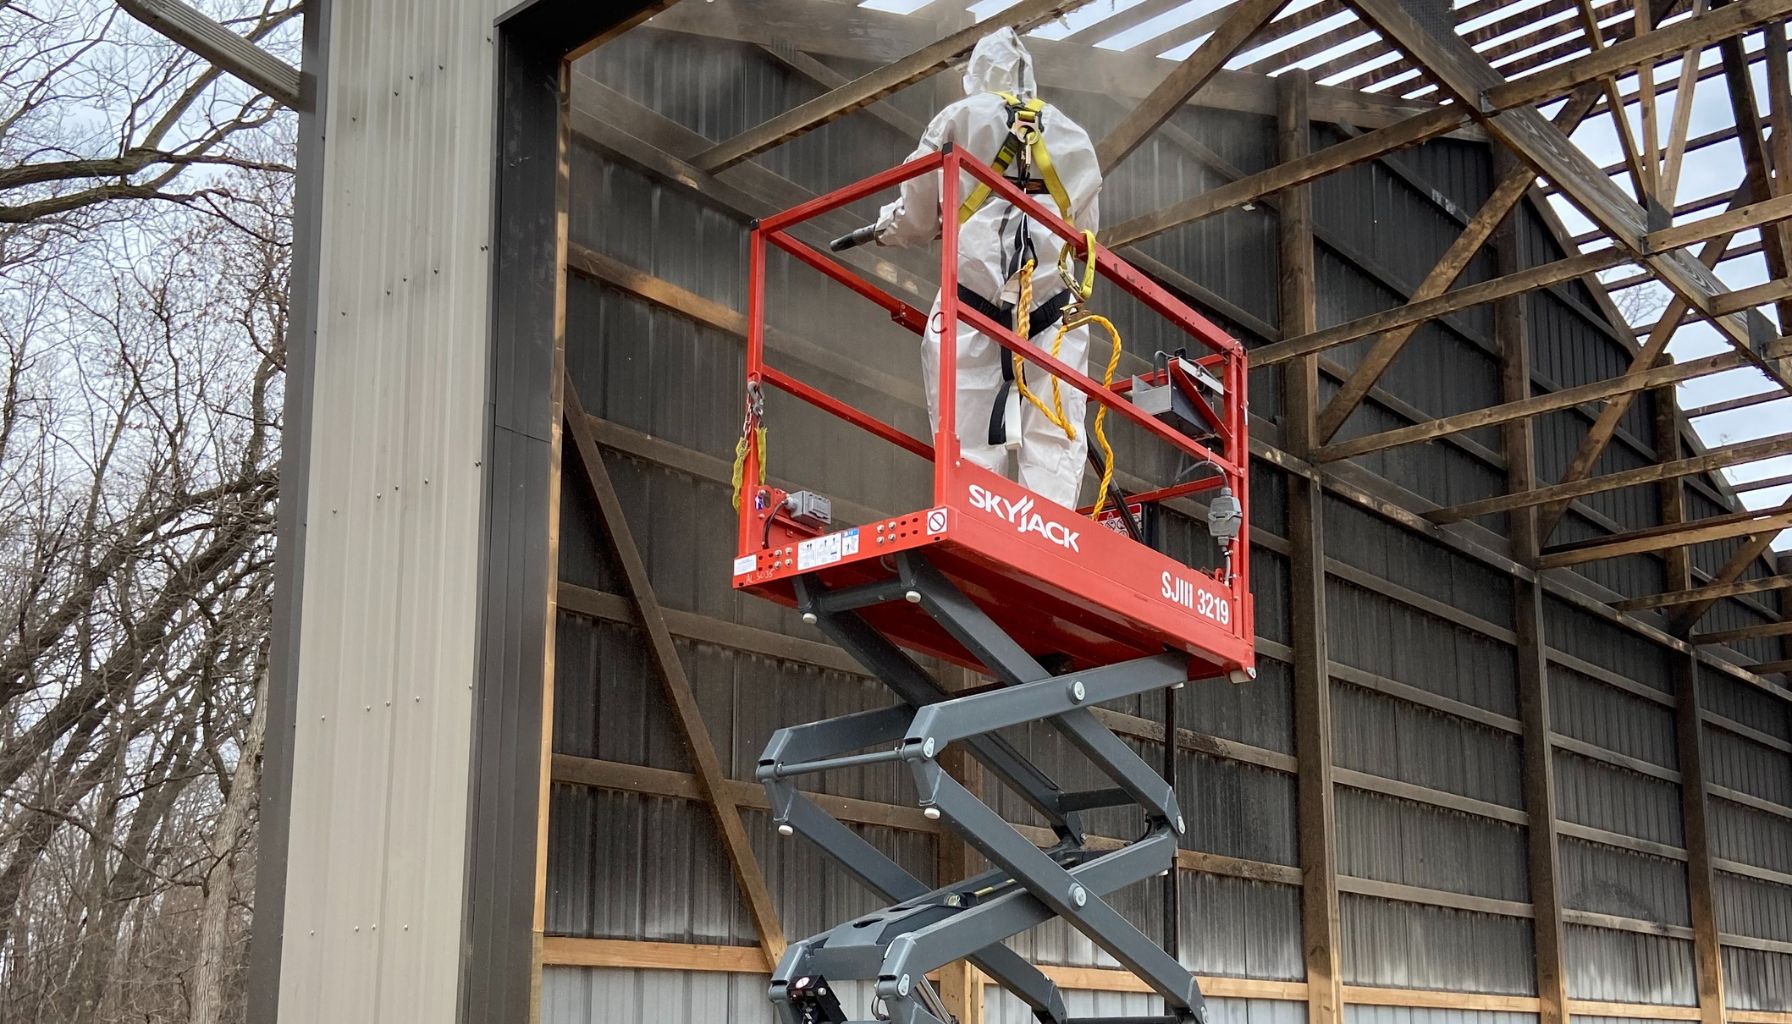 A worker in protective gear stands on a raised scissor lift, inspecting or working on the structure of a large, partially open building, possibly focusing on mold restoration. -PureOneServices